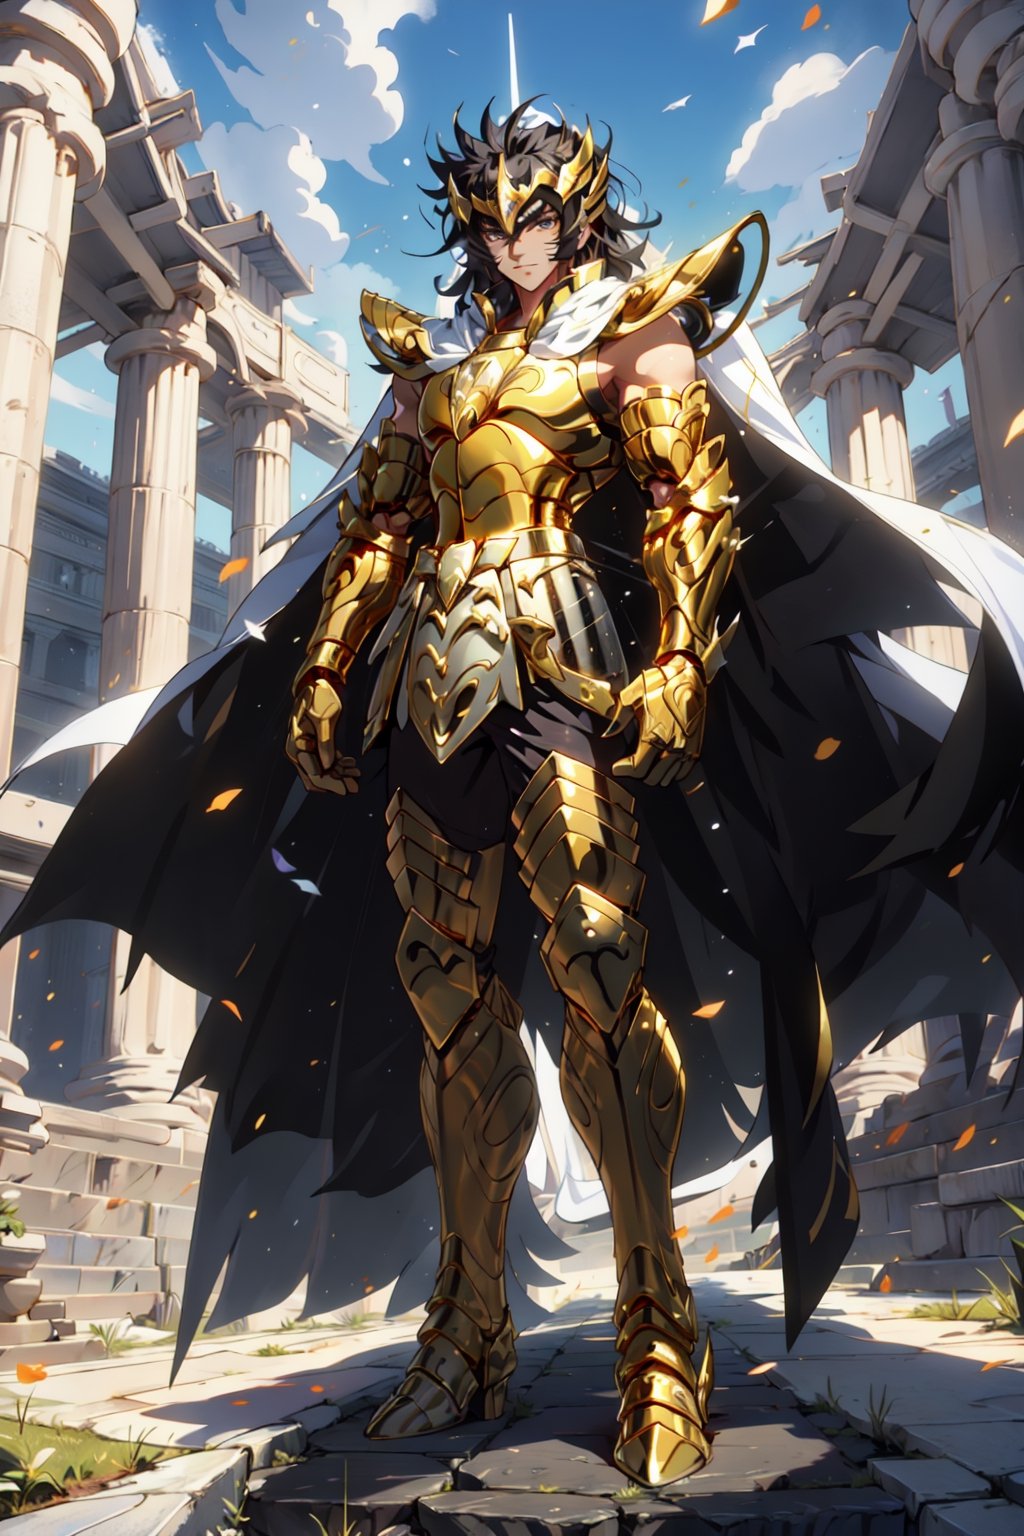 absurdres, highres, ultra detailed,Insane detail in face,  (boy:1.3), Gold Saint, Saint Seiya Style, (((Gold Armor))), Full body armor, no helmet, Zodiac Knights, (((white long cape))), black hair, Asian Fighting style pose,Pokemon Gotcha Style, gold gloves, long hair, long white cape, messy_hair, black eyes, black pants under armor, full body armor, beautiful old greek temple in the background, beautiful fields, full leg armor,FUJI,midjourney, battle_stance,